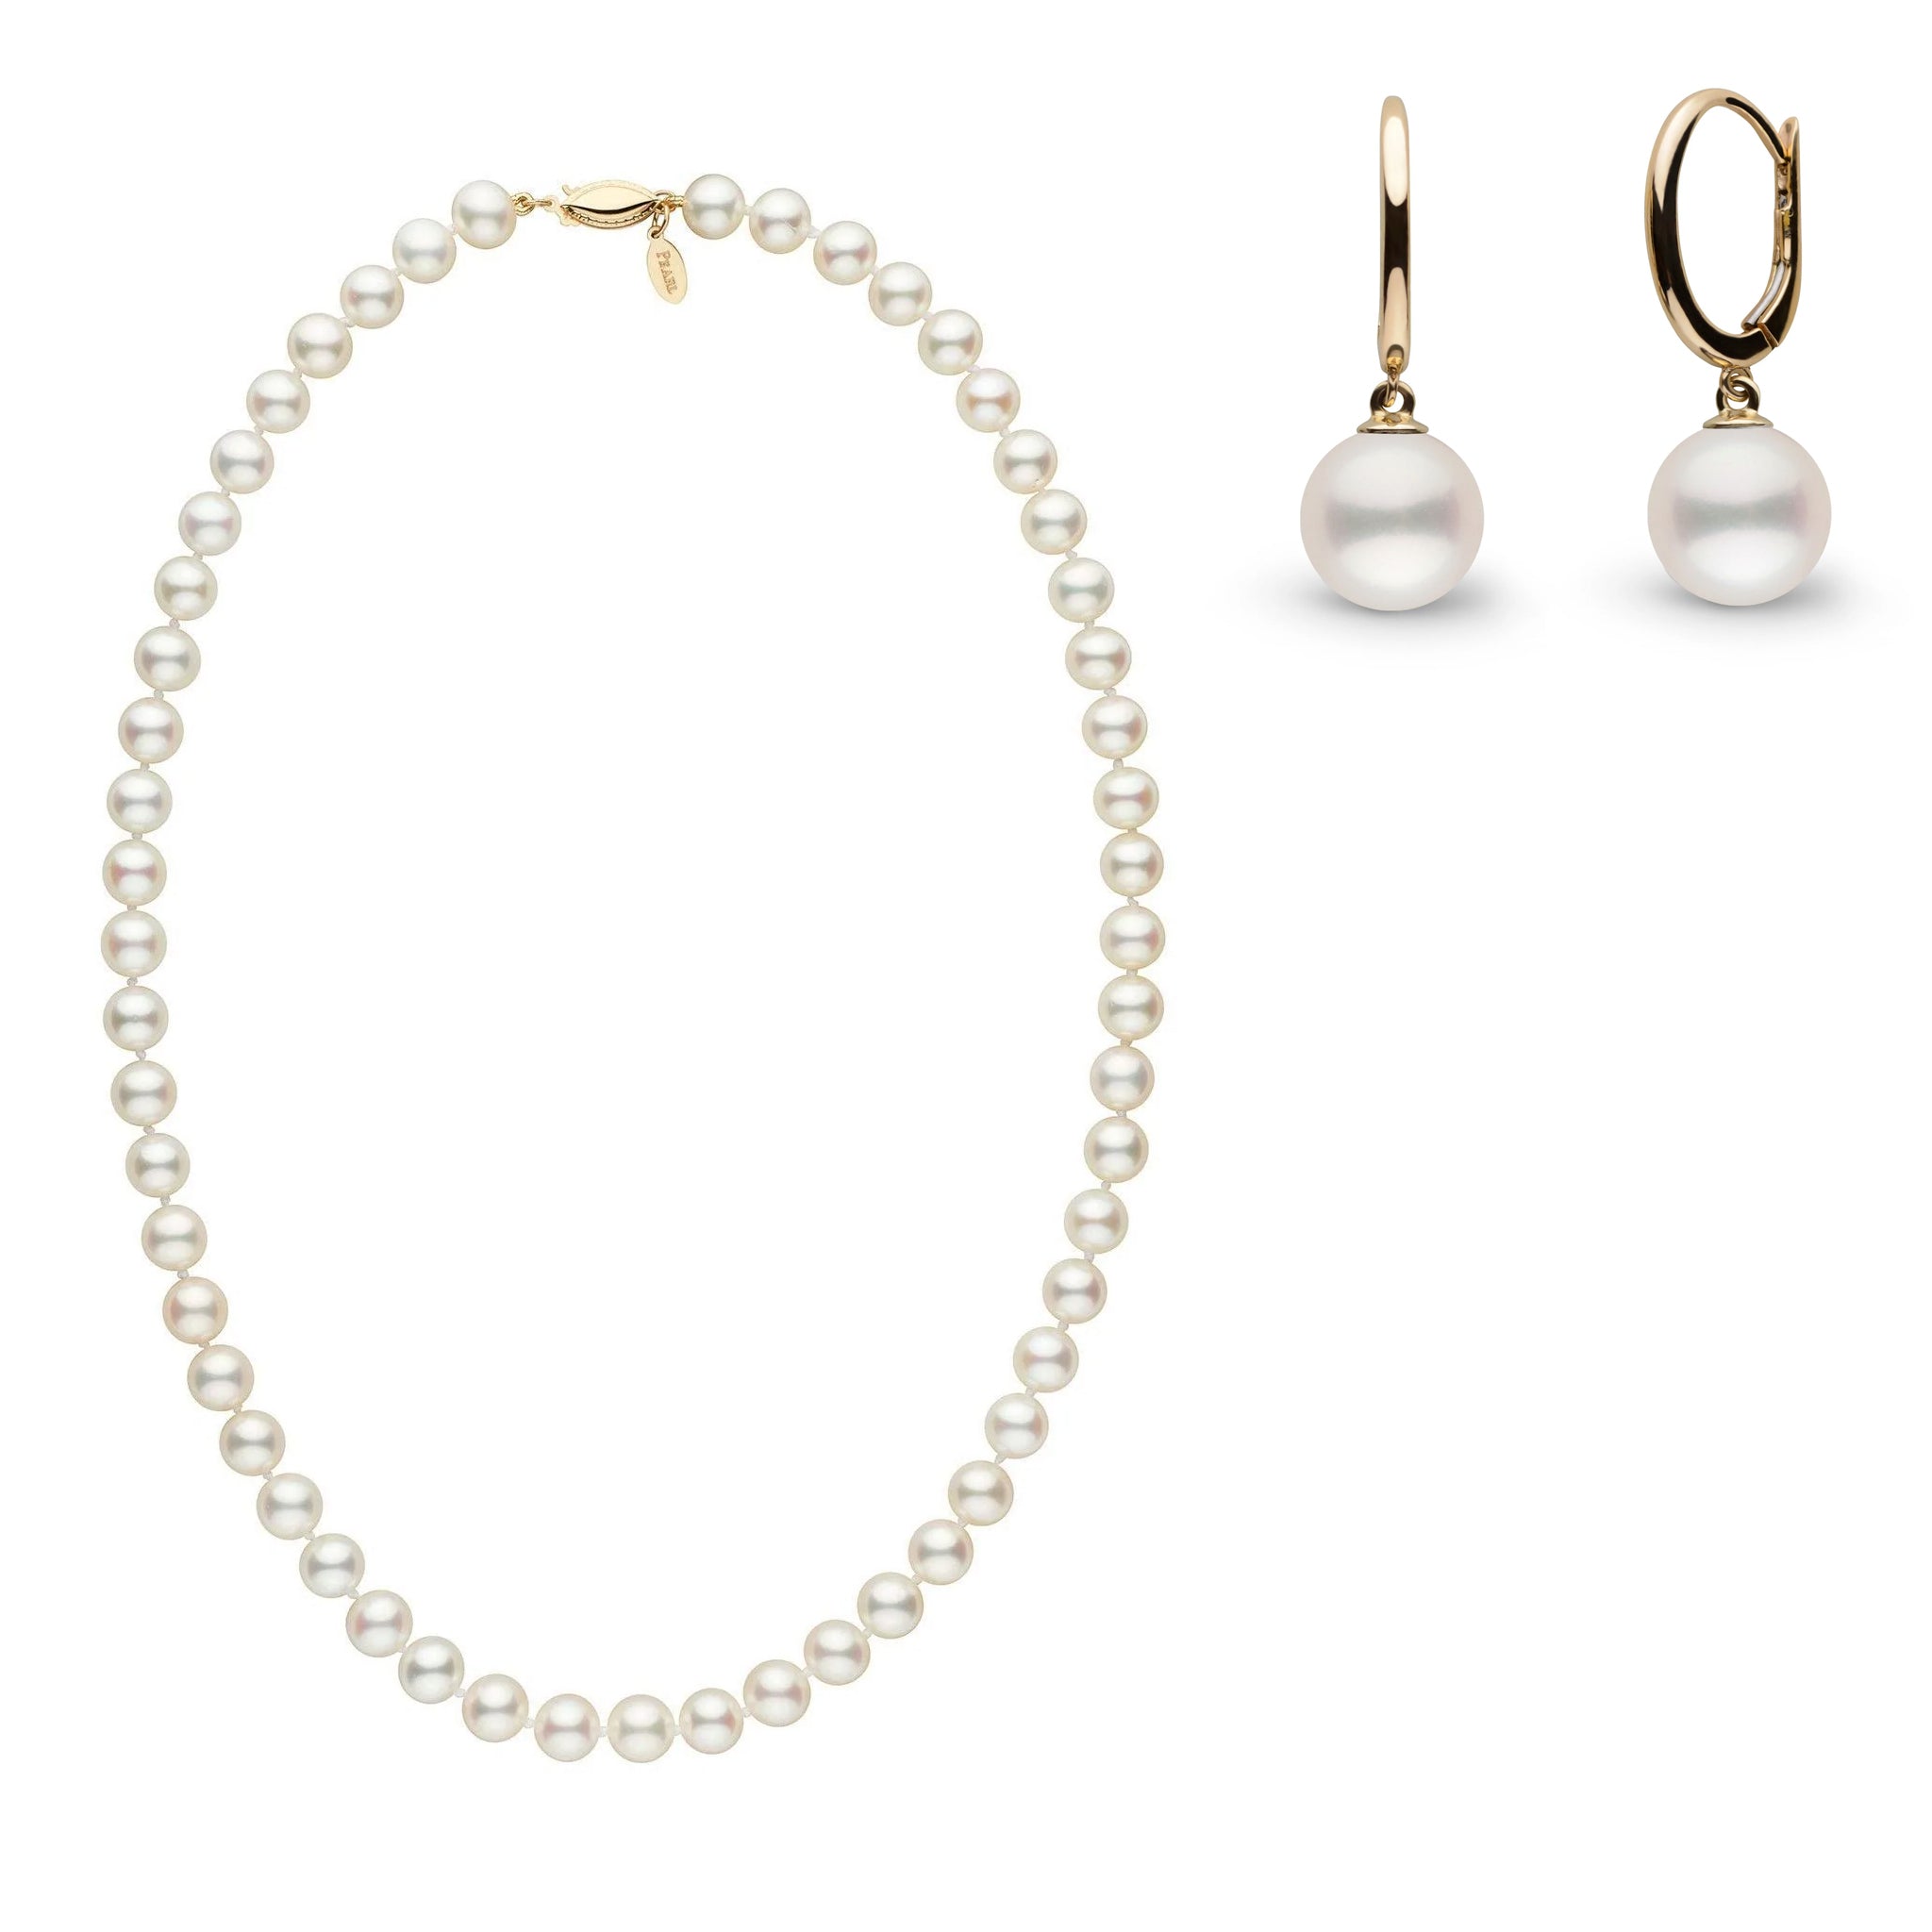 7.5-8.0 mm White Freshadama Freshwater 18 Inch Pearl Necklace with Dangle Earrings